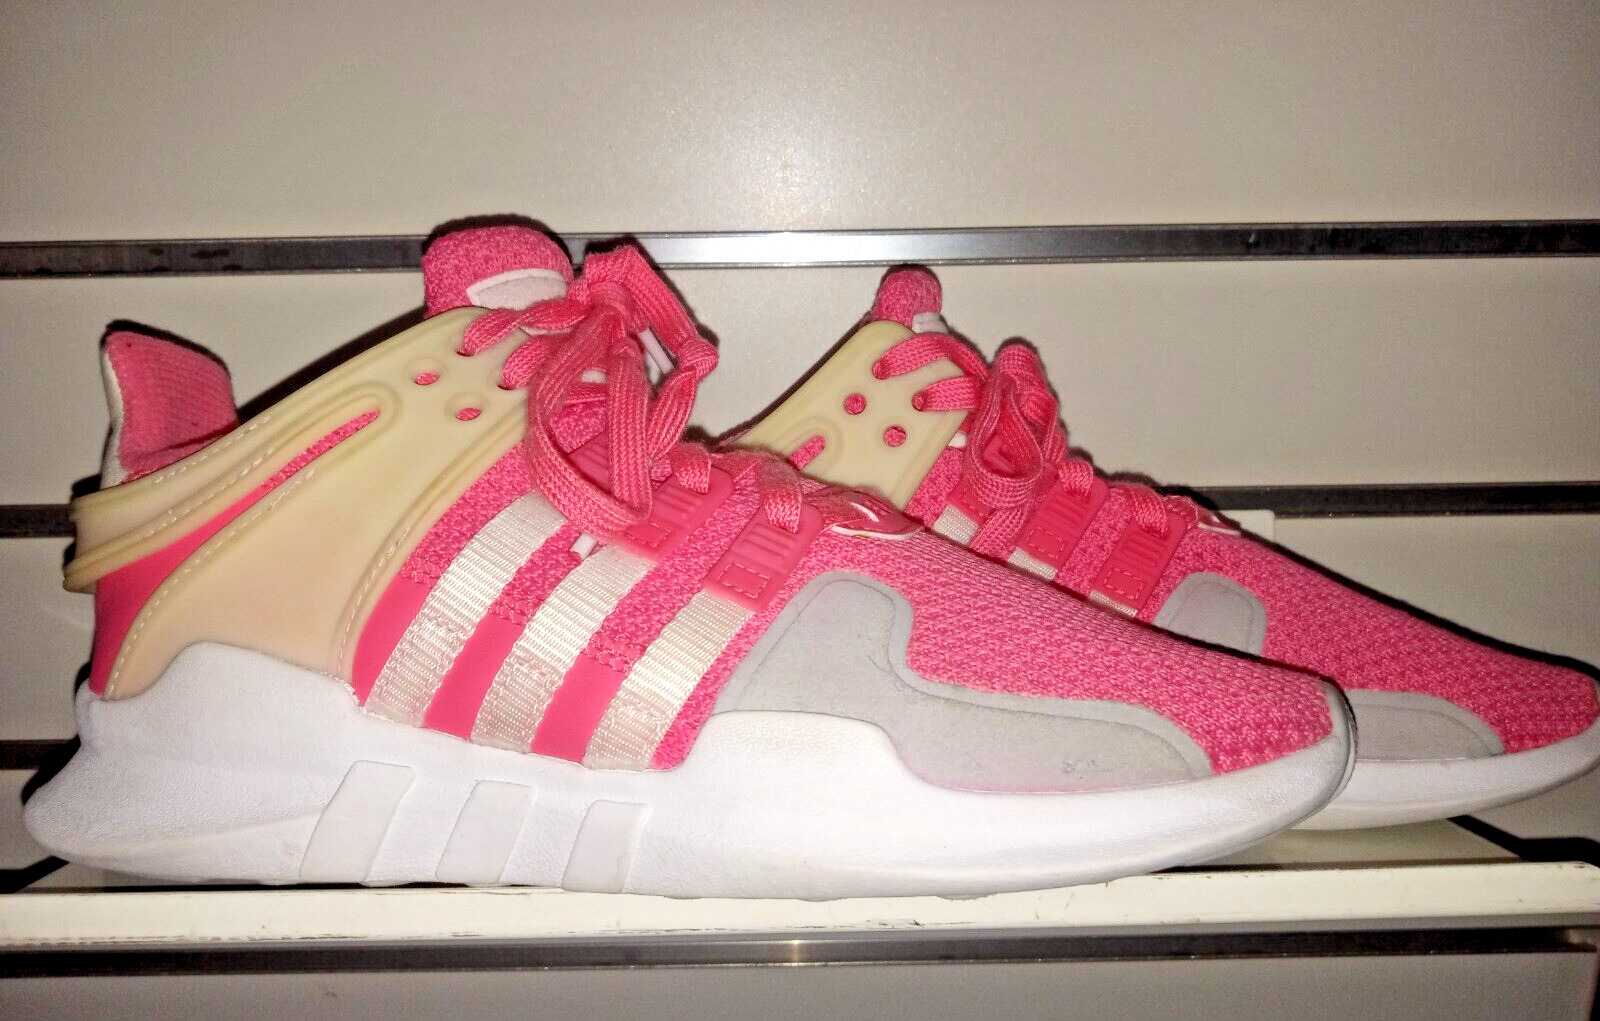 ✨ Adidas Women\'s Girls Teen Pink and White EQT ADV 91-16 Sneakers Size 4.5 ✨